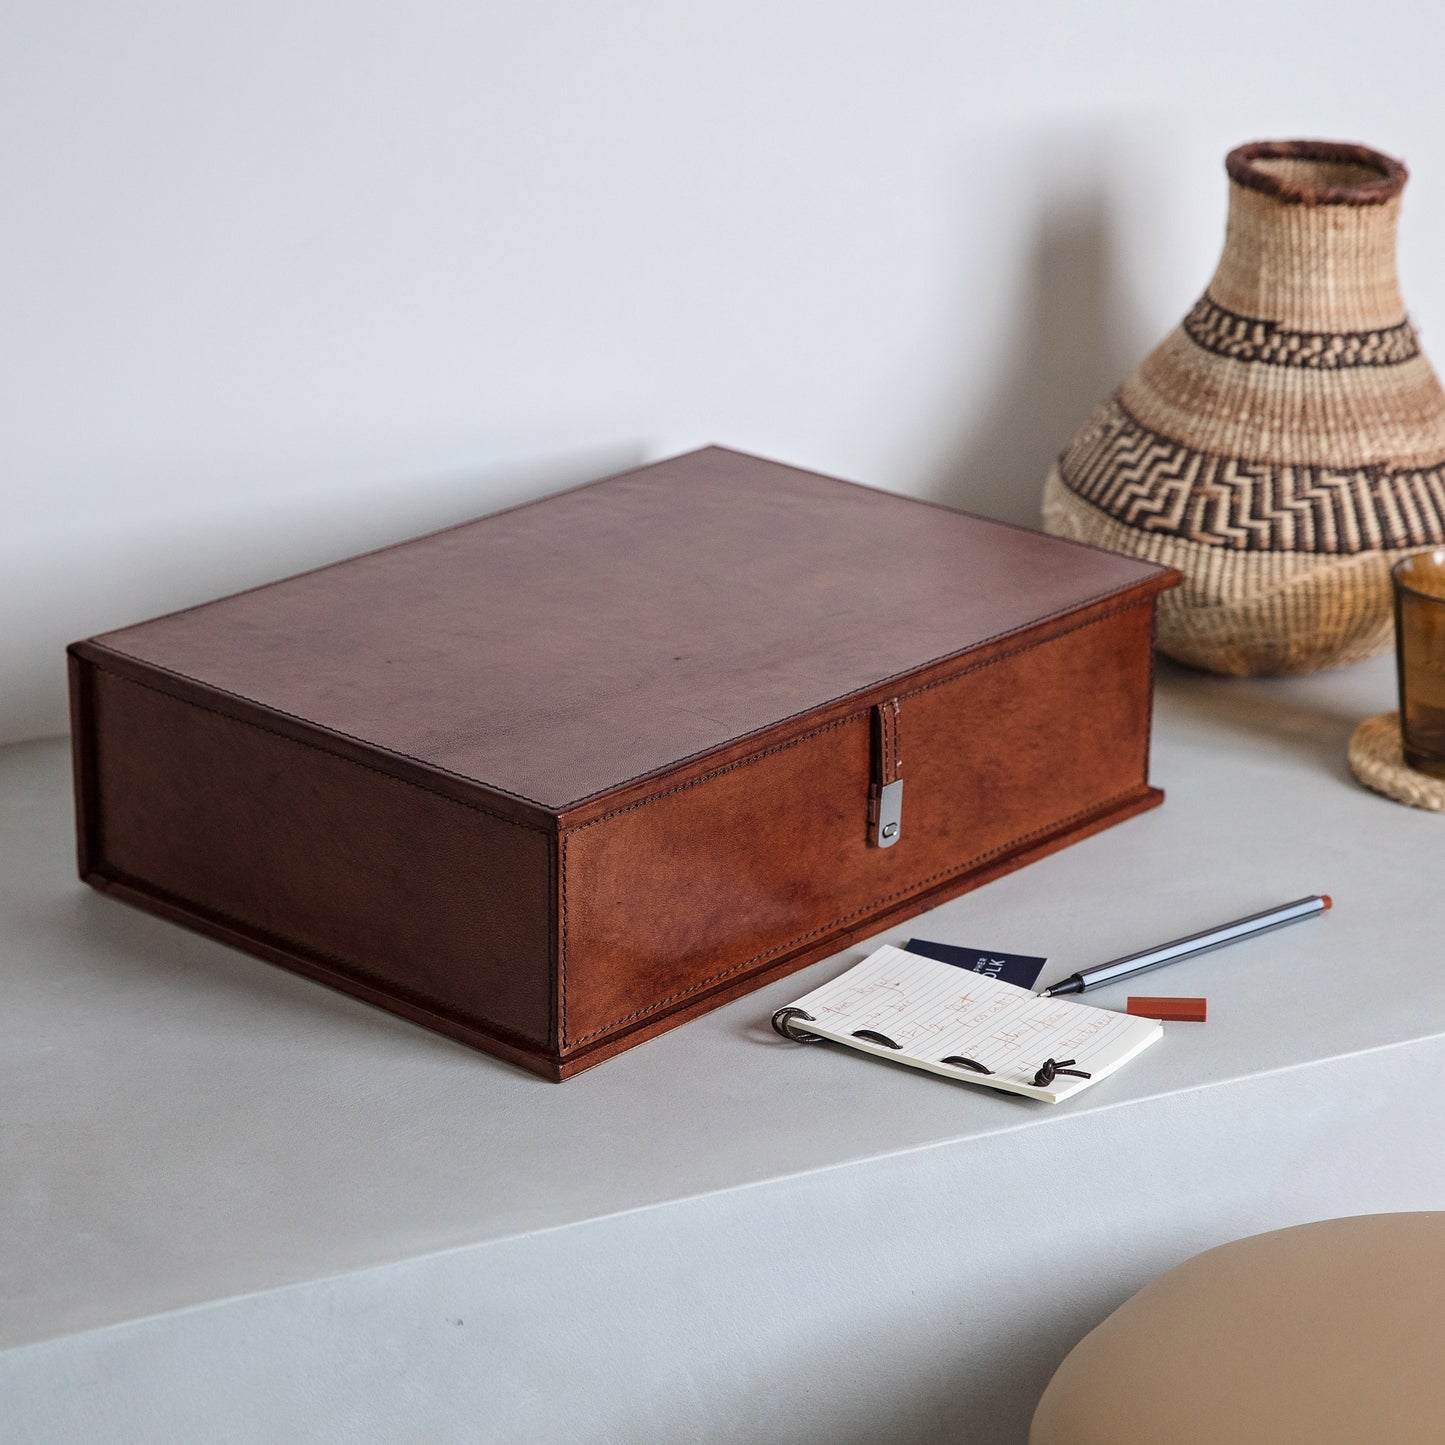 Leather box file in tan with suede interior and chrome clasp. Perfect for storing important documents or as a memory box for someone special. Part of a collection of stylish desk and home accessories, that make thoughtful gifts for him and her.